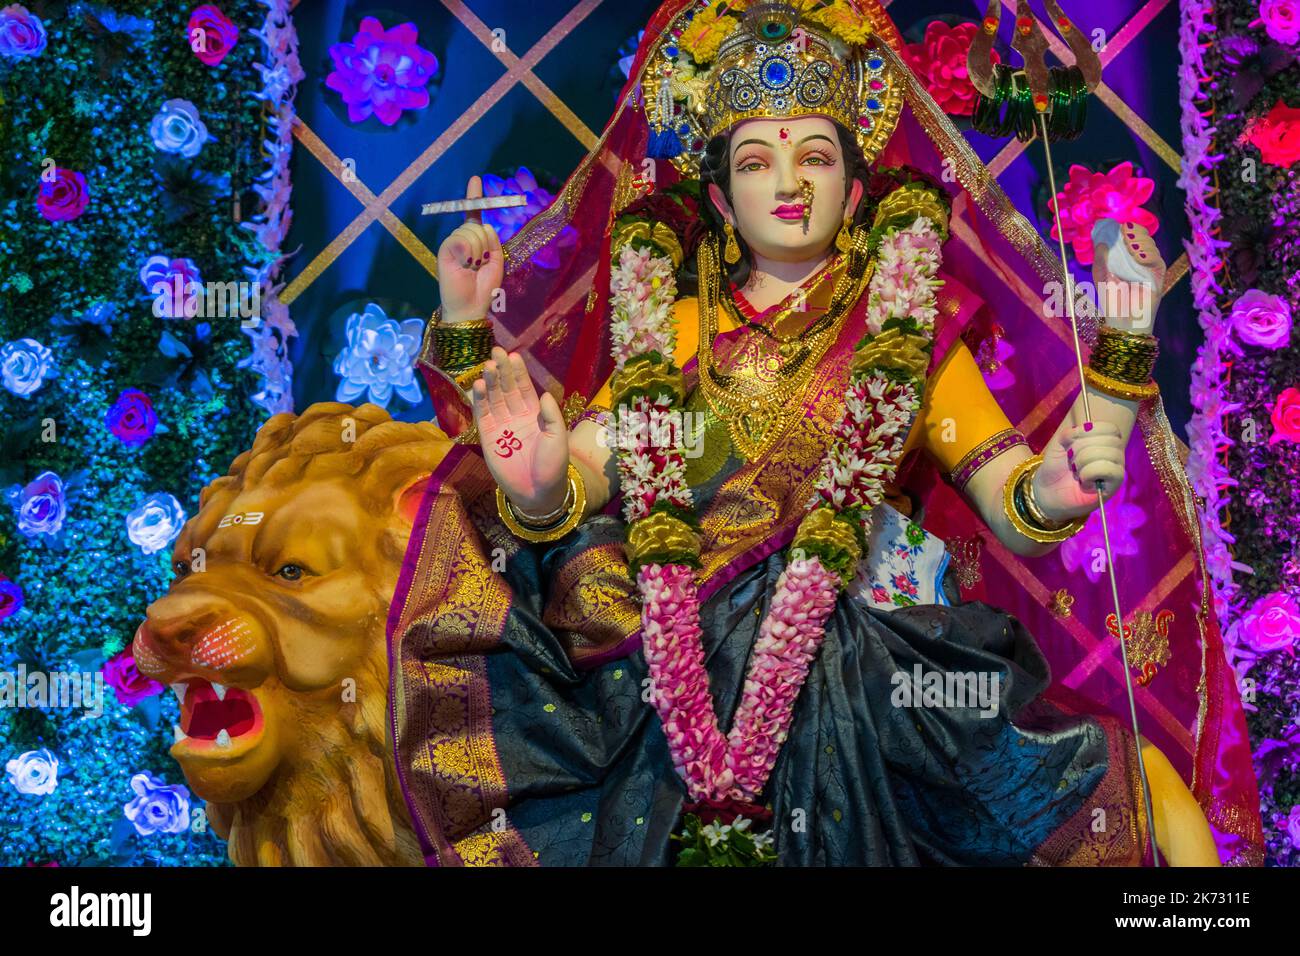 A beautiful idol of Maa Durga being worshipped at a mandal in Mumbai for the auspicious Indian festival of Navratri Stock Photo